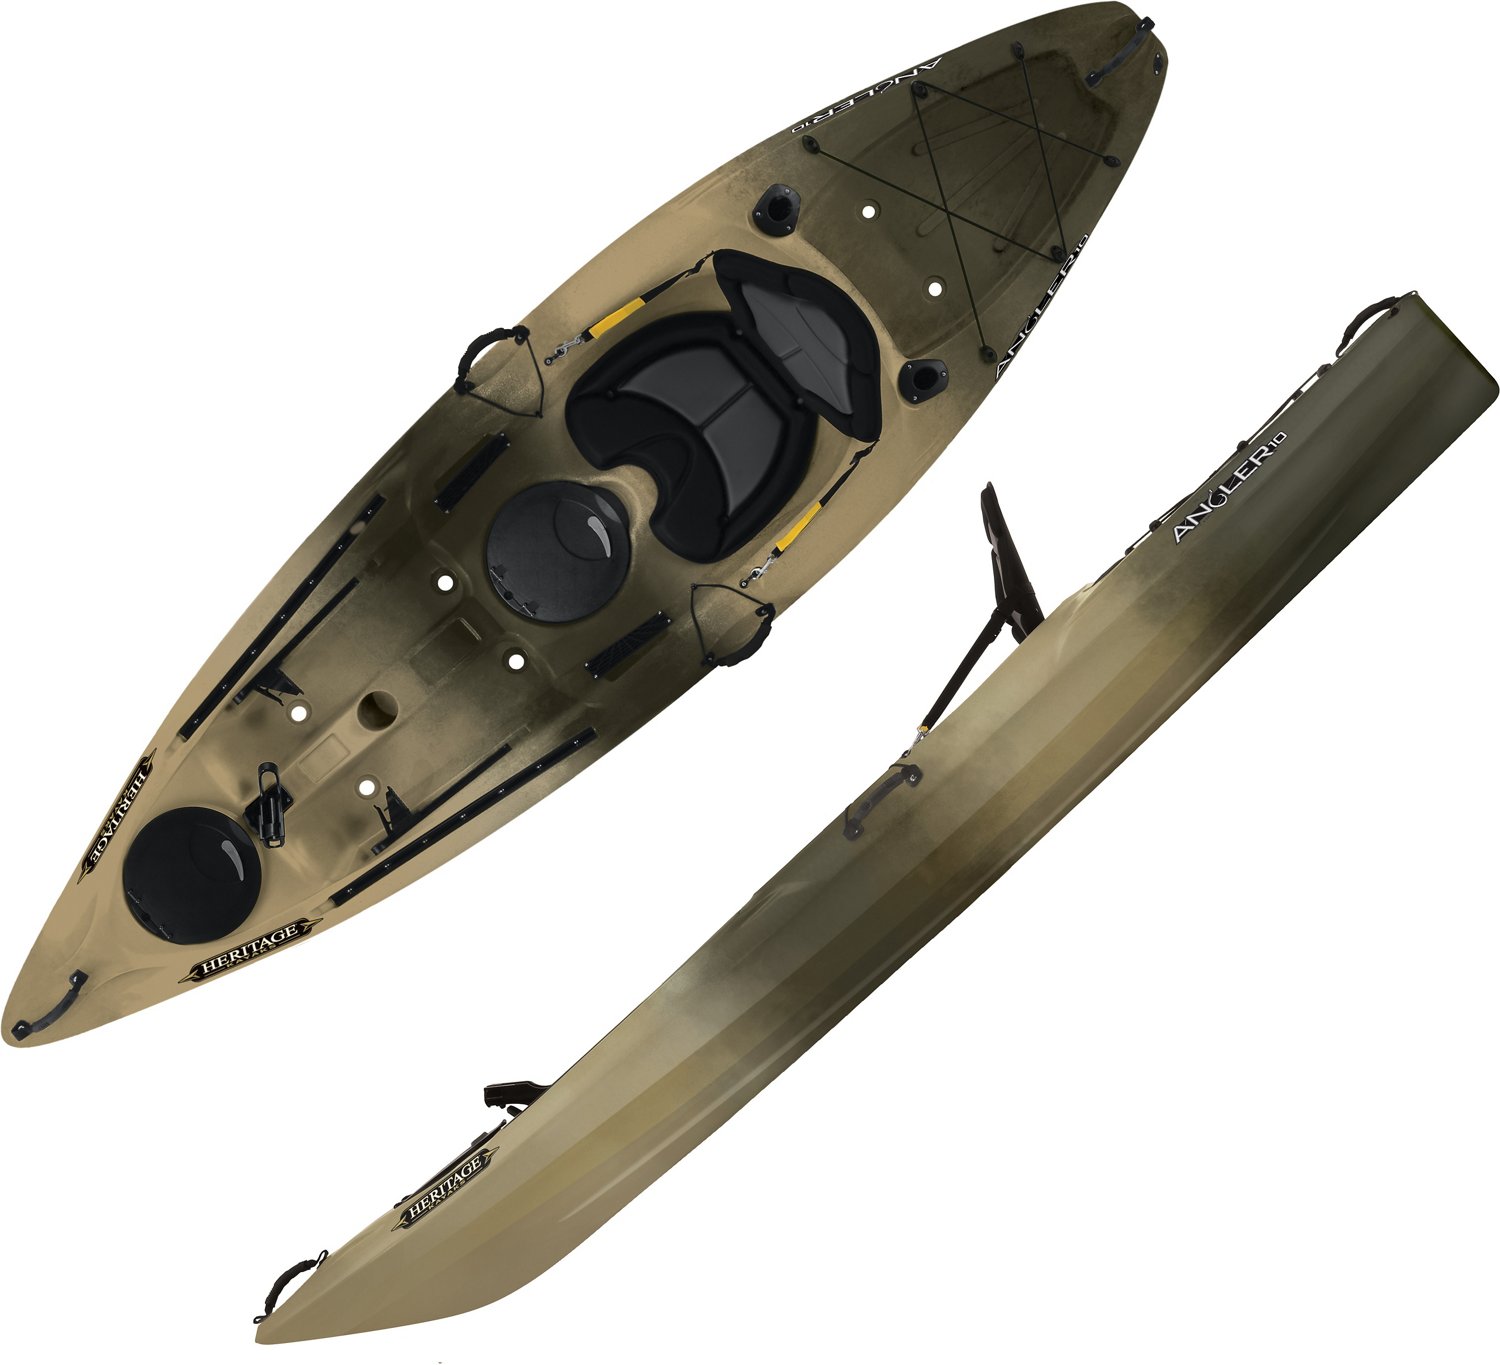 Heritage Angler 10 10 ft Sit-On-Top Angler Kayak                                                                                 - view number 1 selected